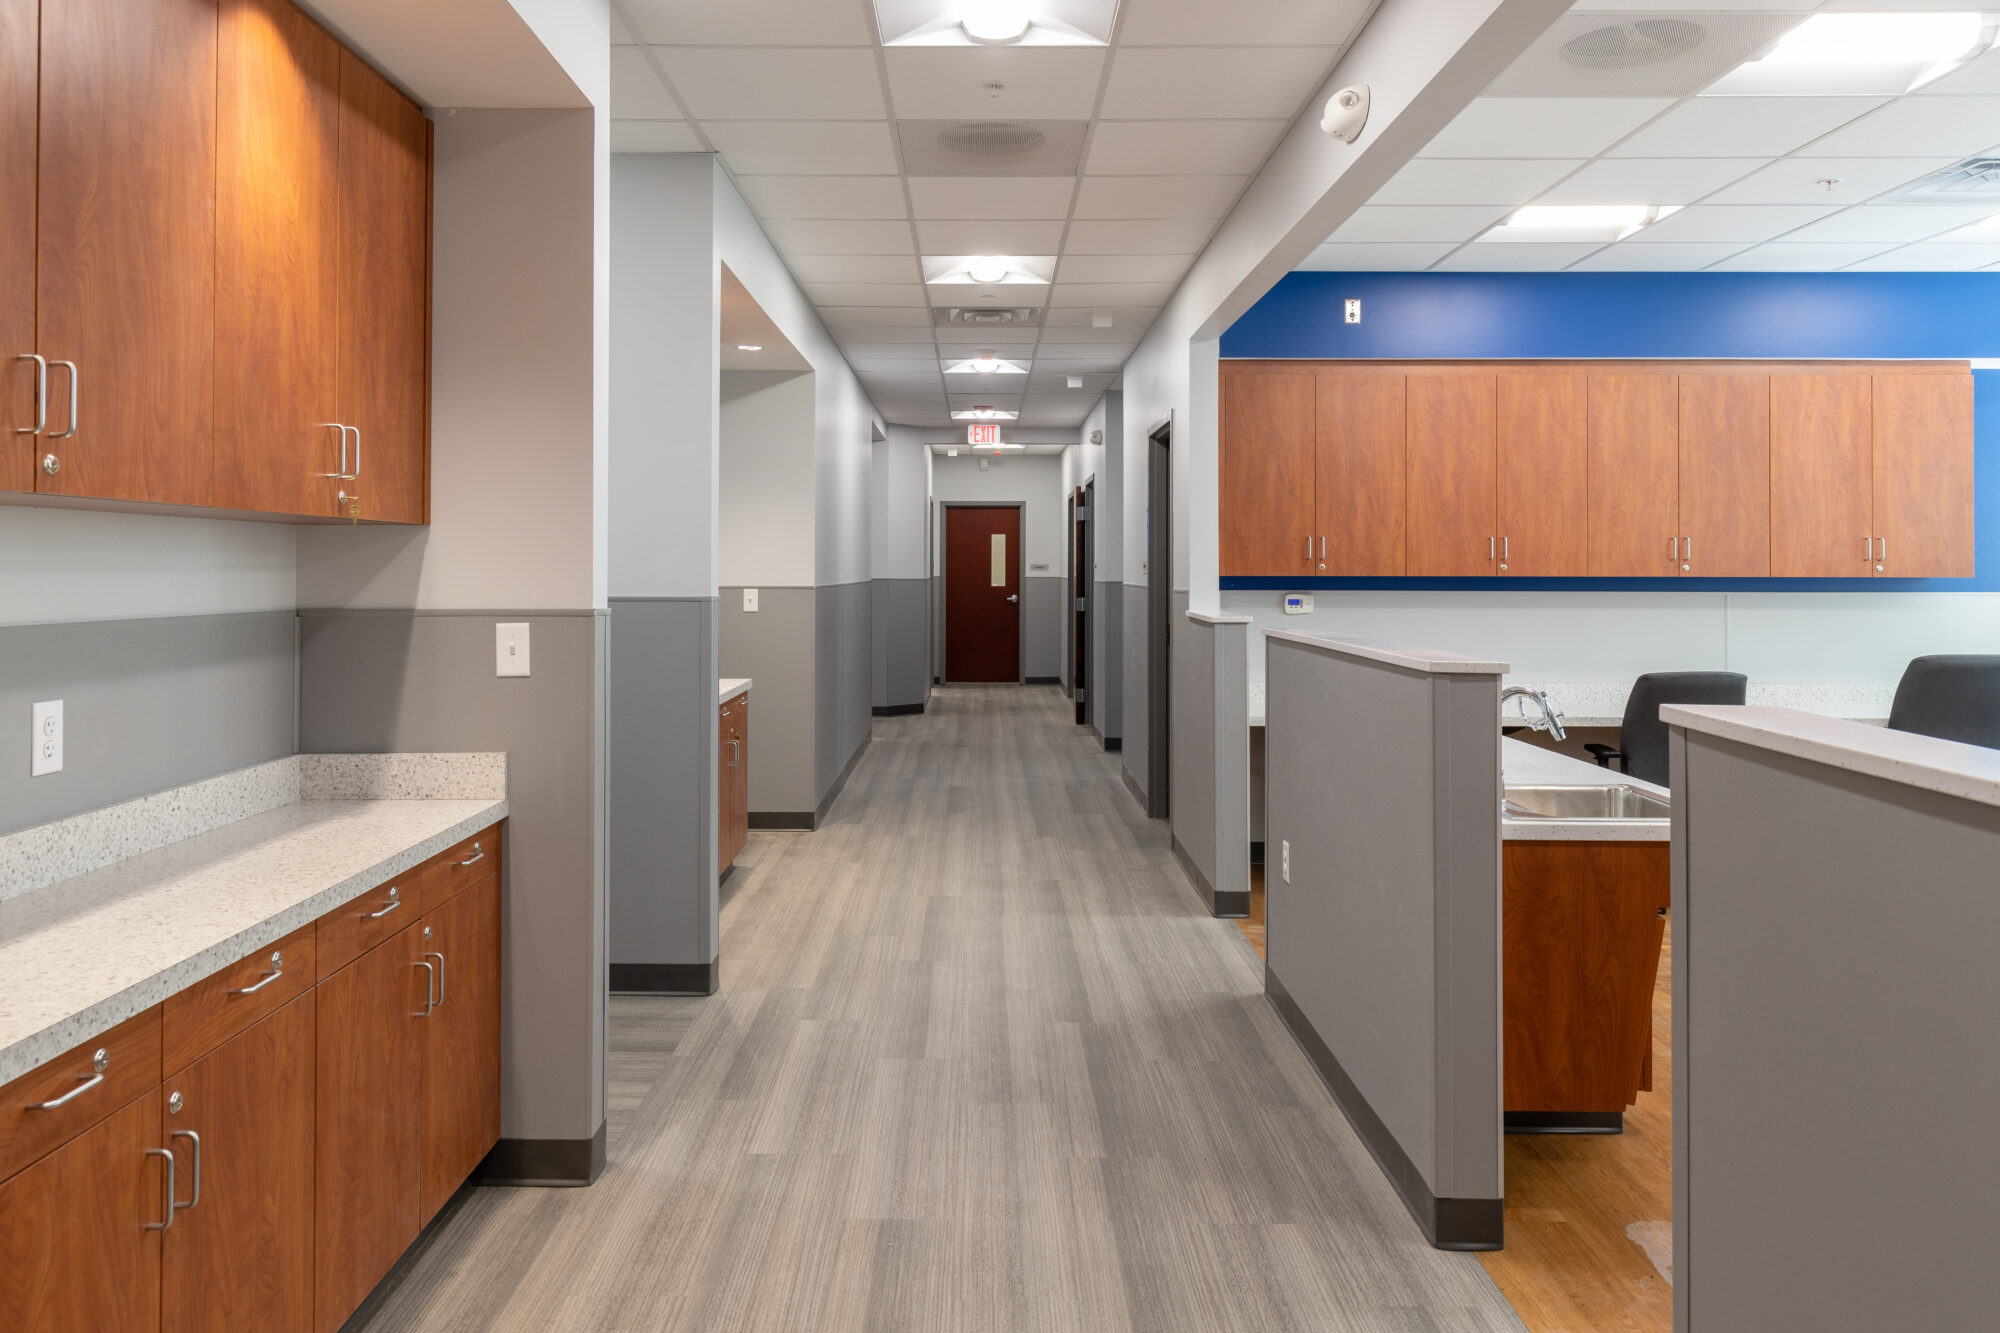 Planned Parenthood office renovation featuring a new look and layout by R.E. McNamara Inc.